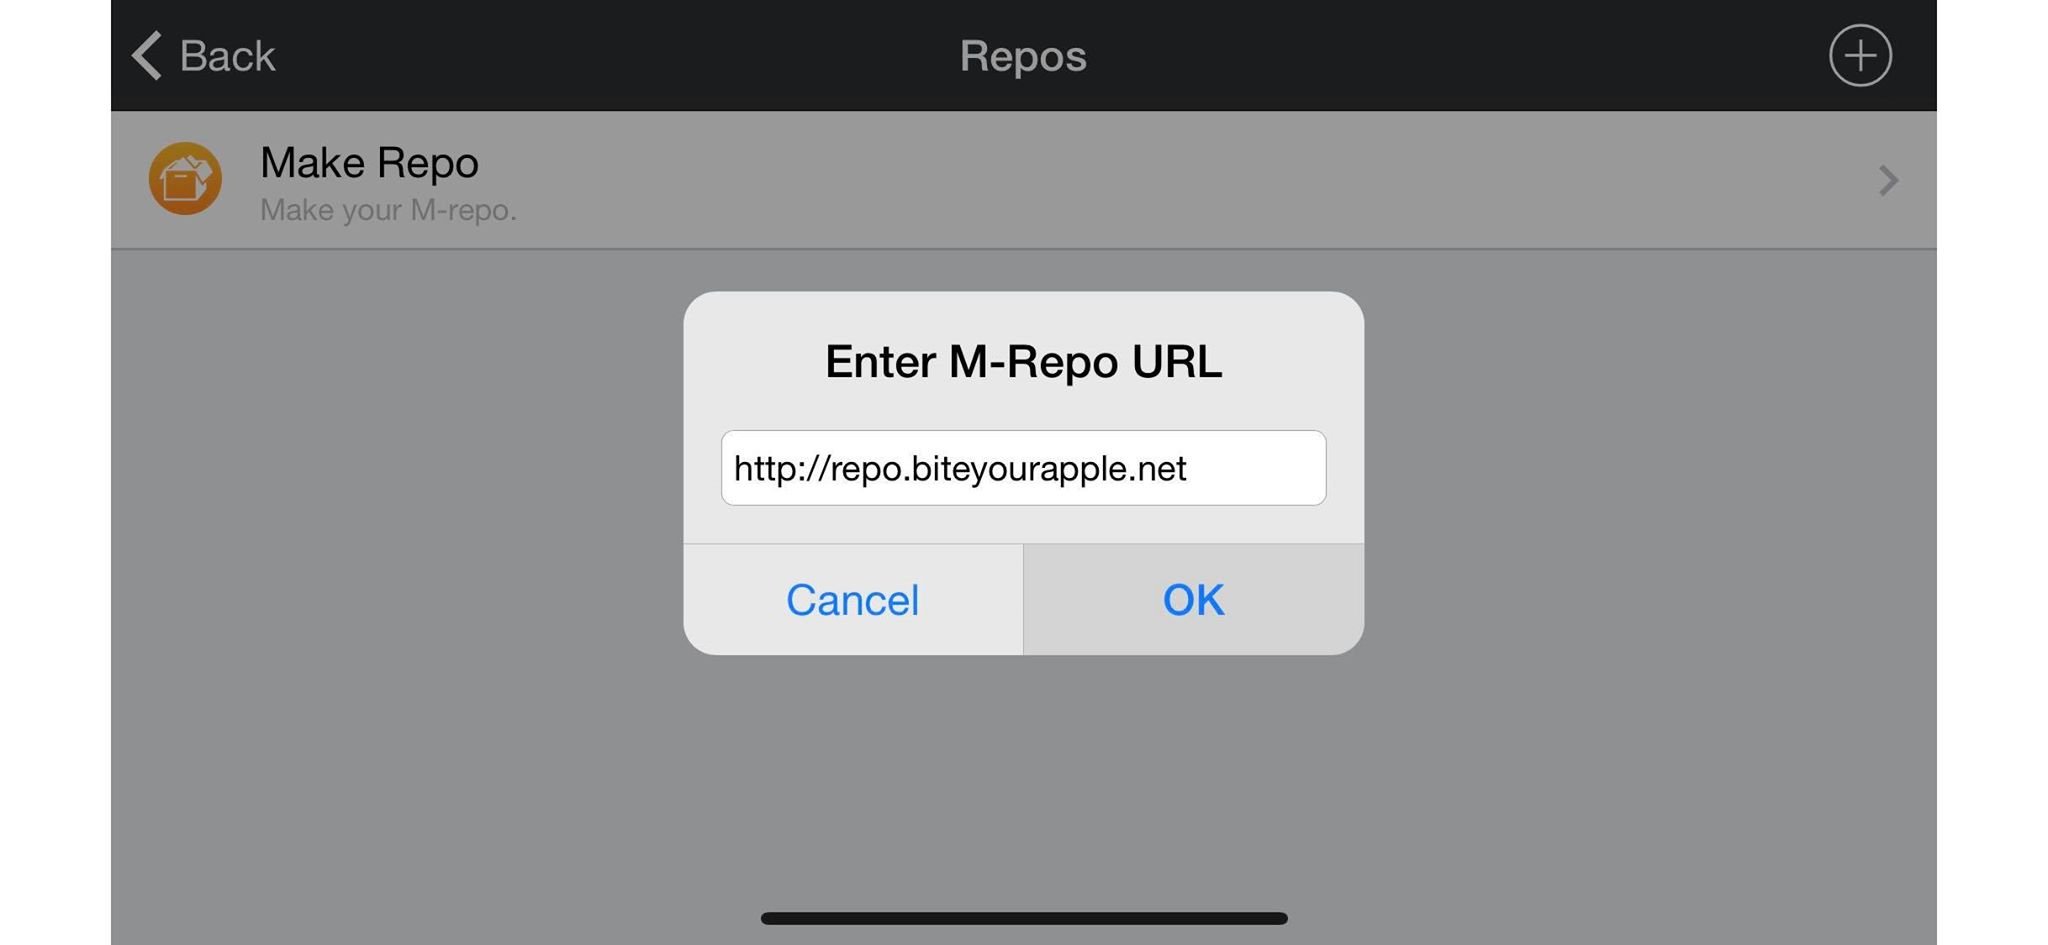 how to add flekstore repo to the app